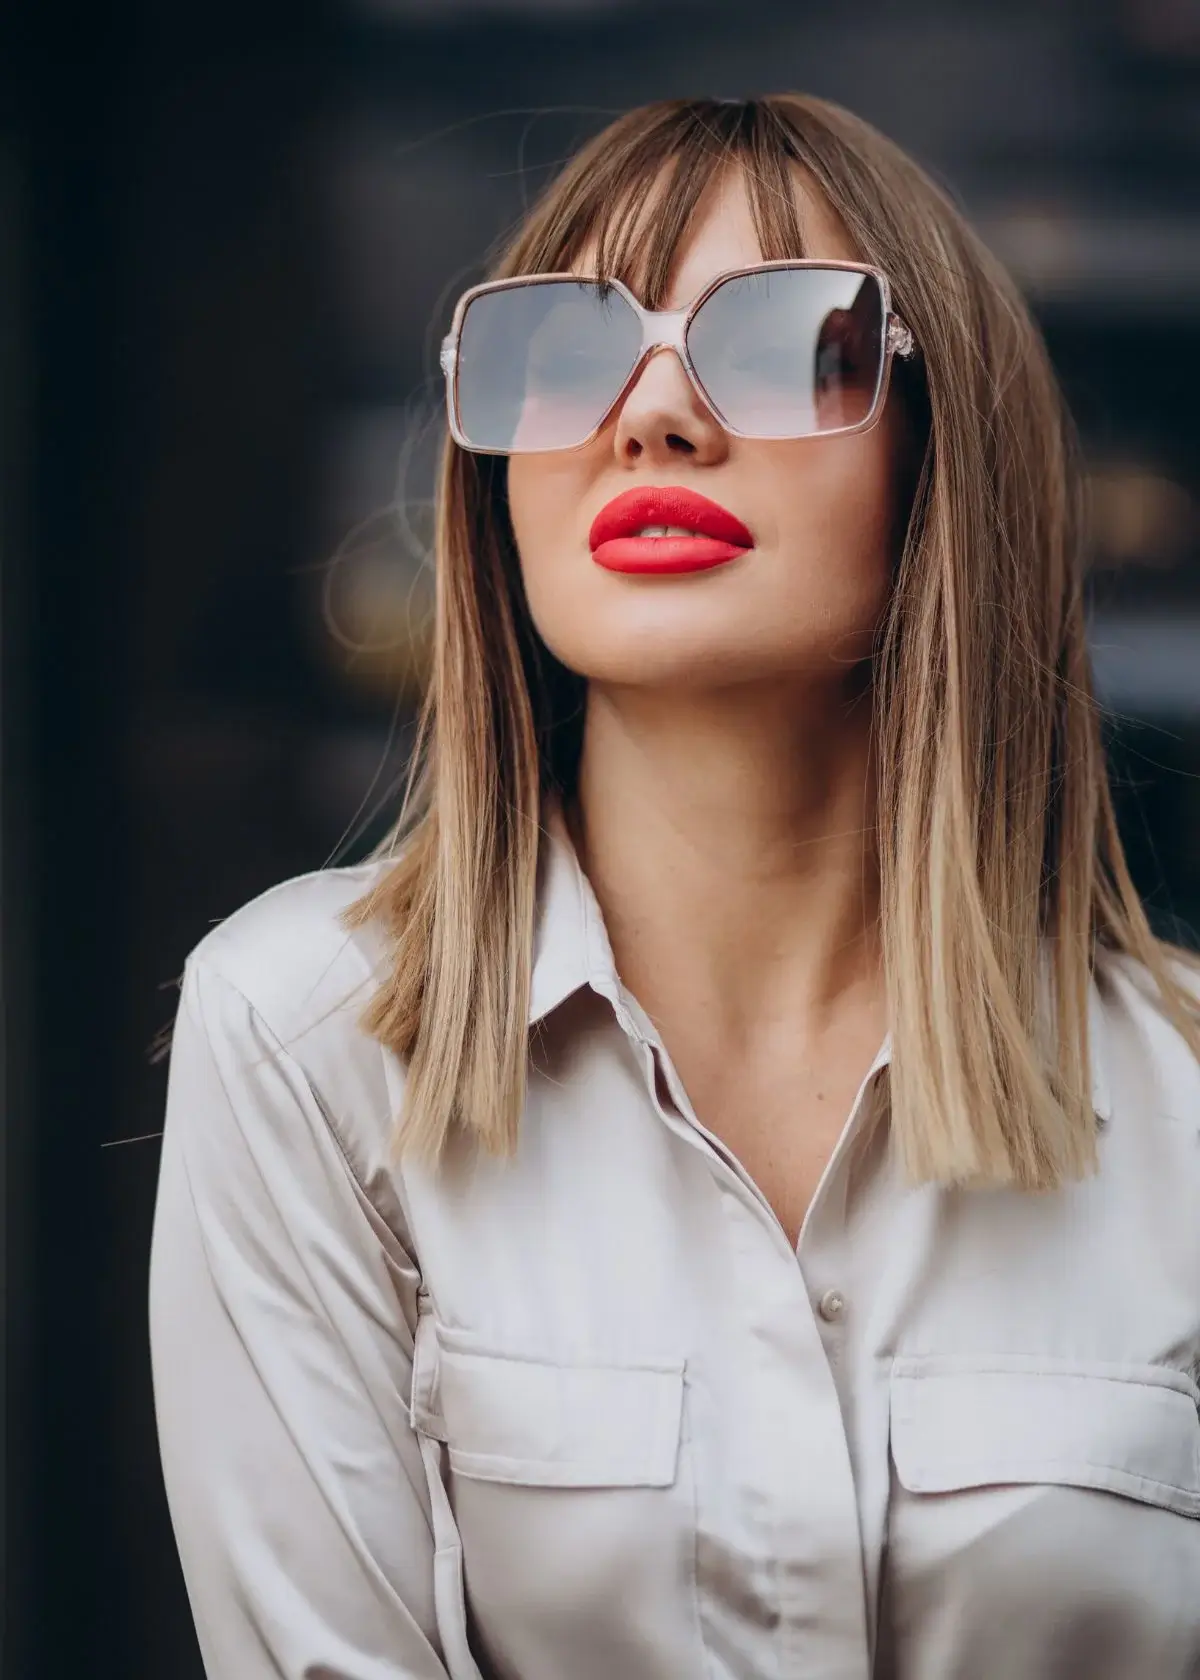 Can women's sunglasses protect against more than UV rays?